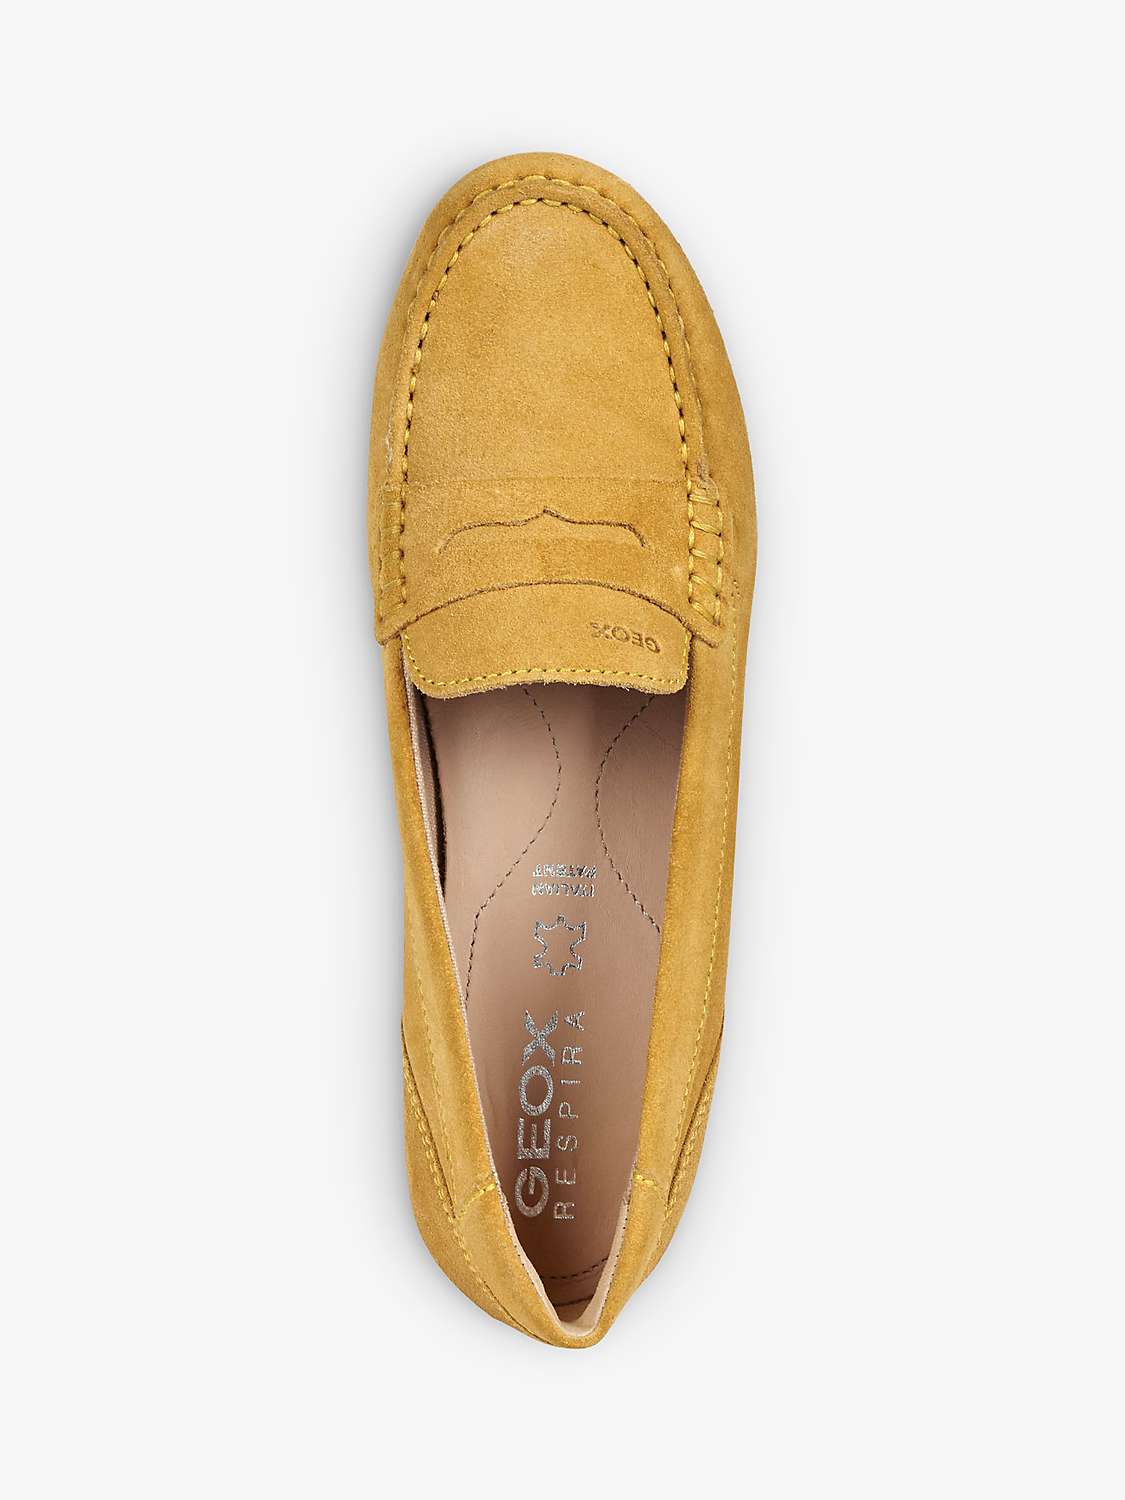 Buy Geox Women's Vega Wide Fit Leather Moccasins, Yellow Online at johnlewis.com